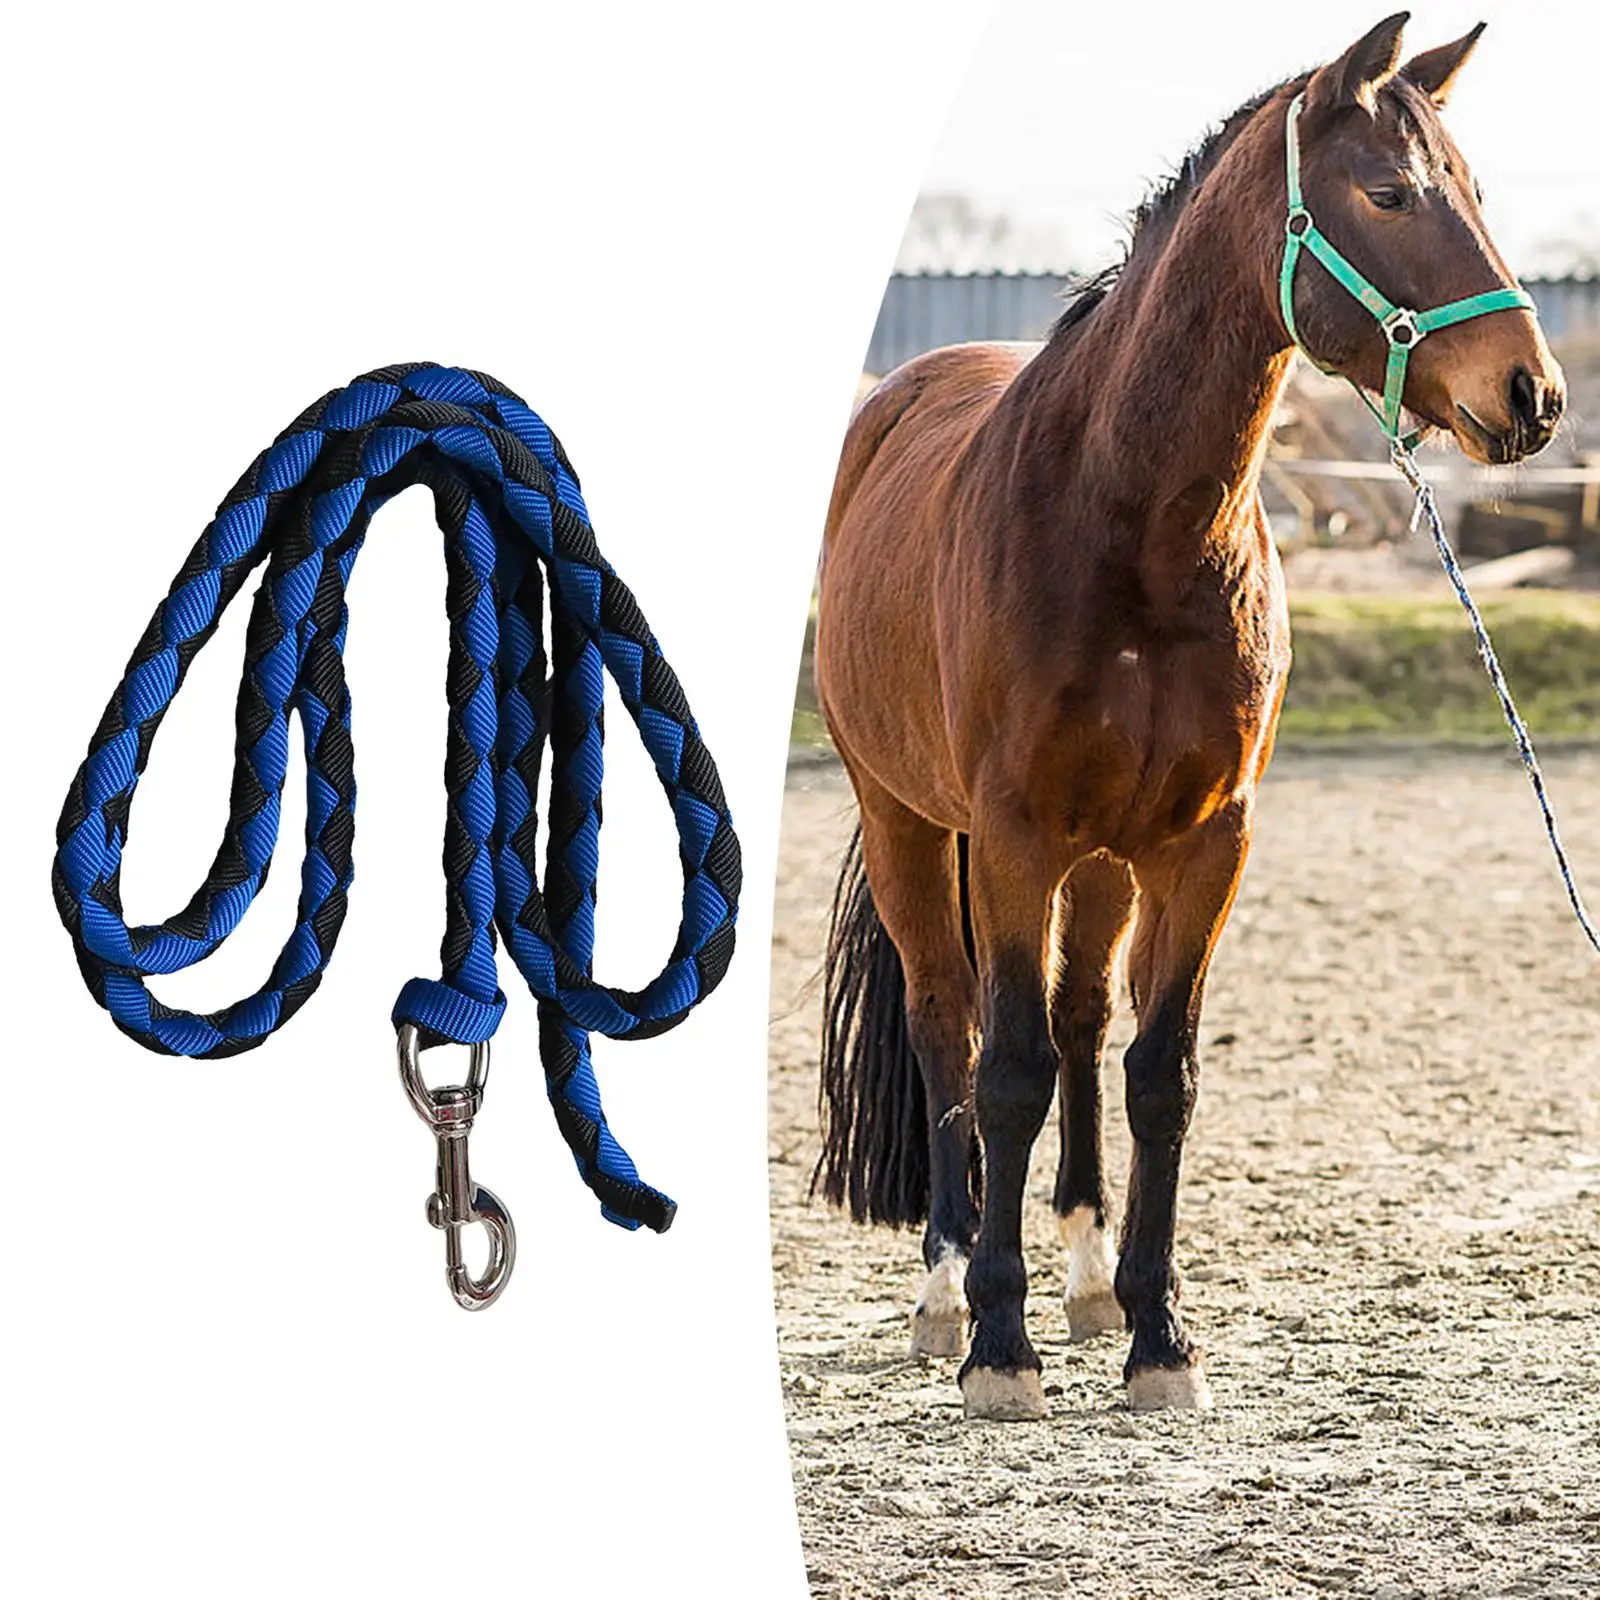 Horse rope with bolt closure Braided horse rope for leading training horses,